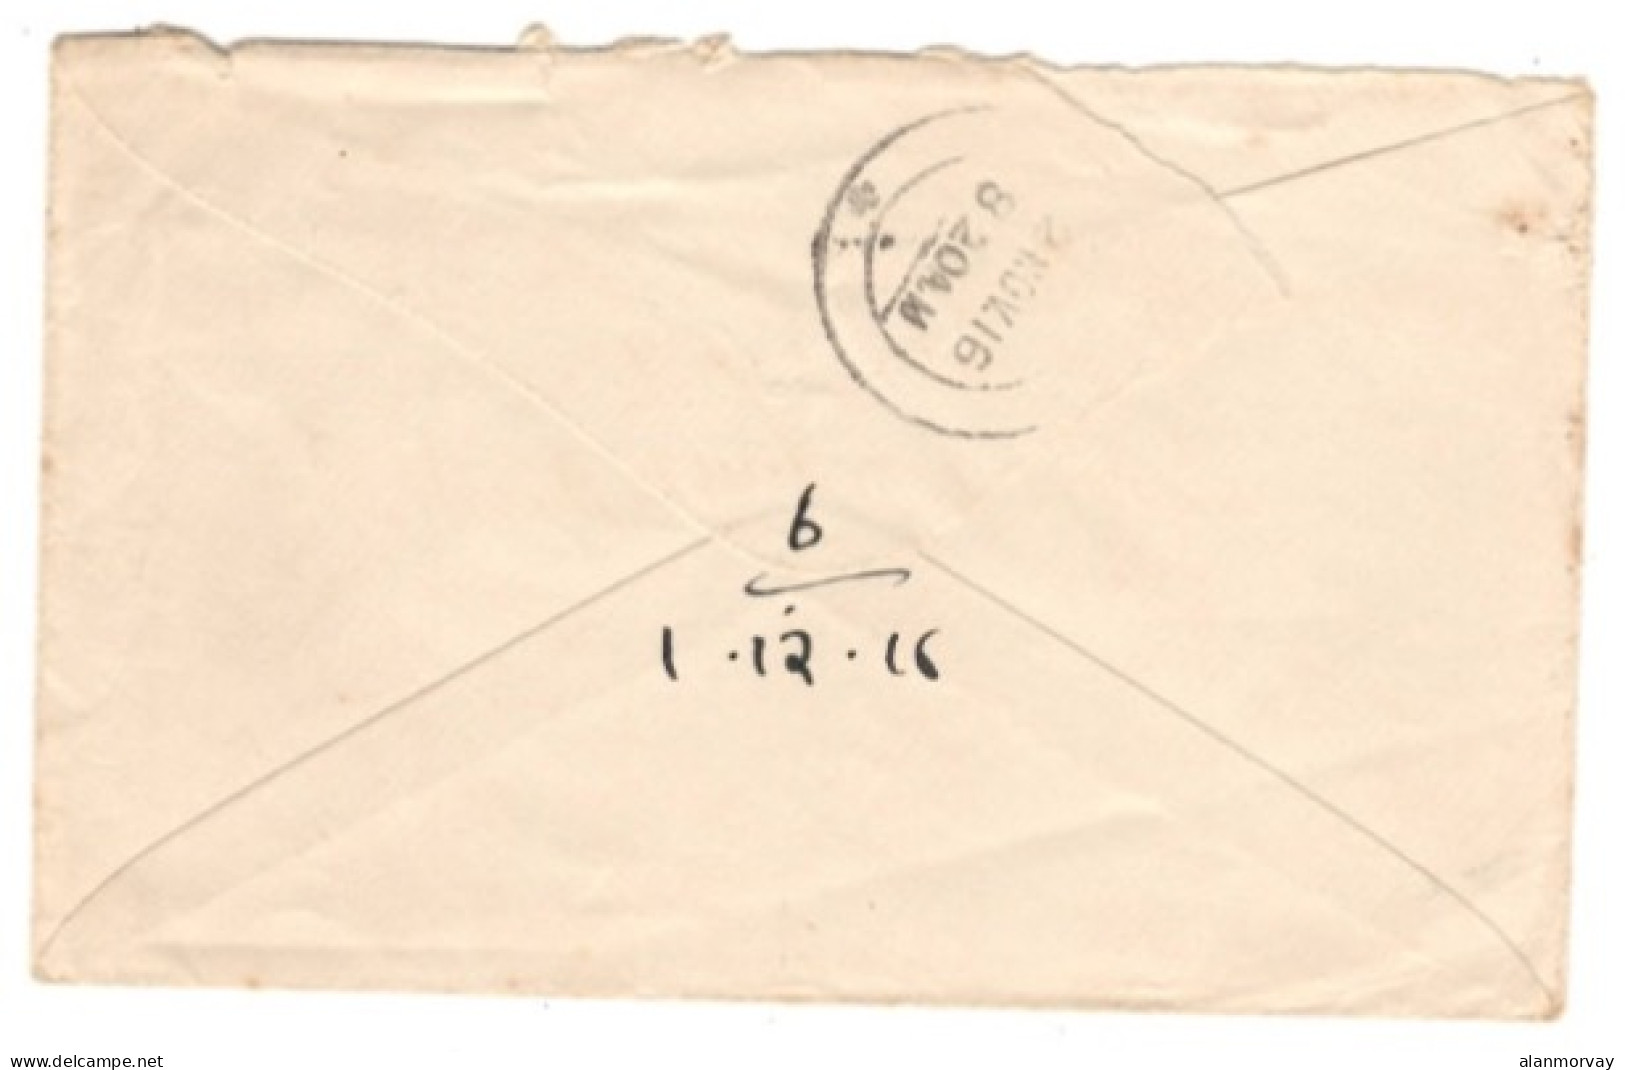 Aden - October 31, 1916 Aden Censored Cover To Australia With A Great Britain Stamp, Paquetbot Cancel, And Censor Mark - Aden (1854-1963)